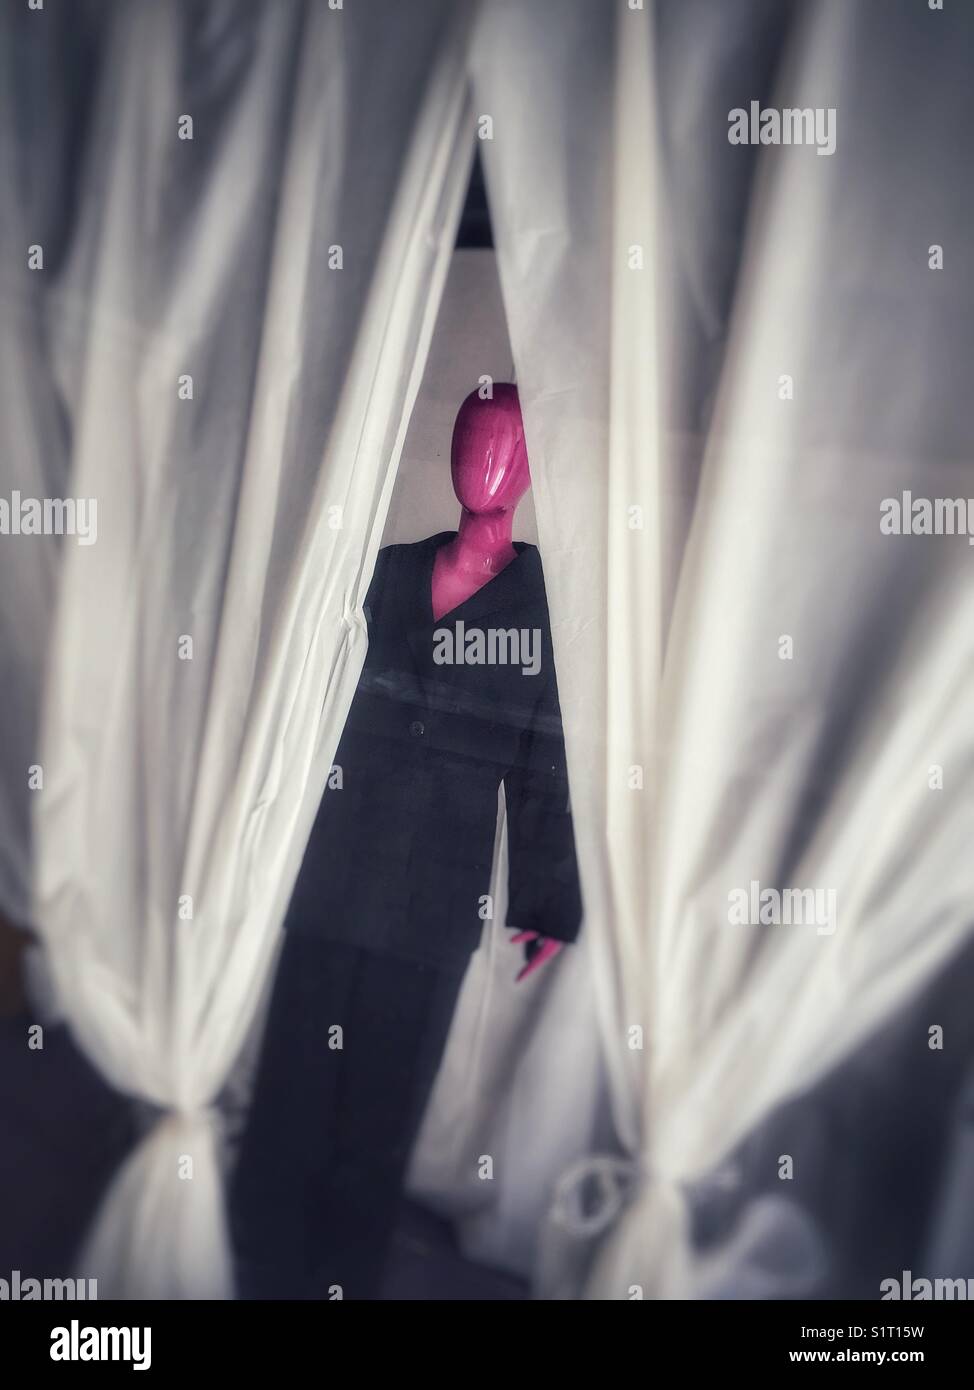 Hot pink mannequin wearing black suit in thrift store window Stock Photo